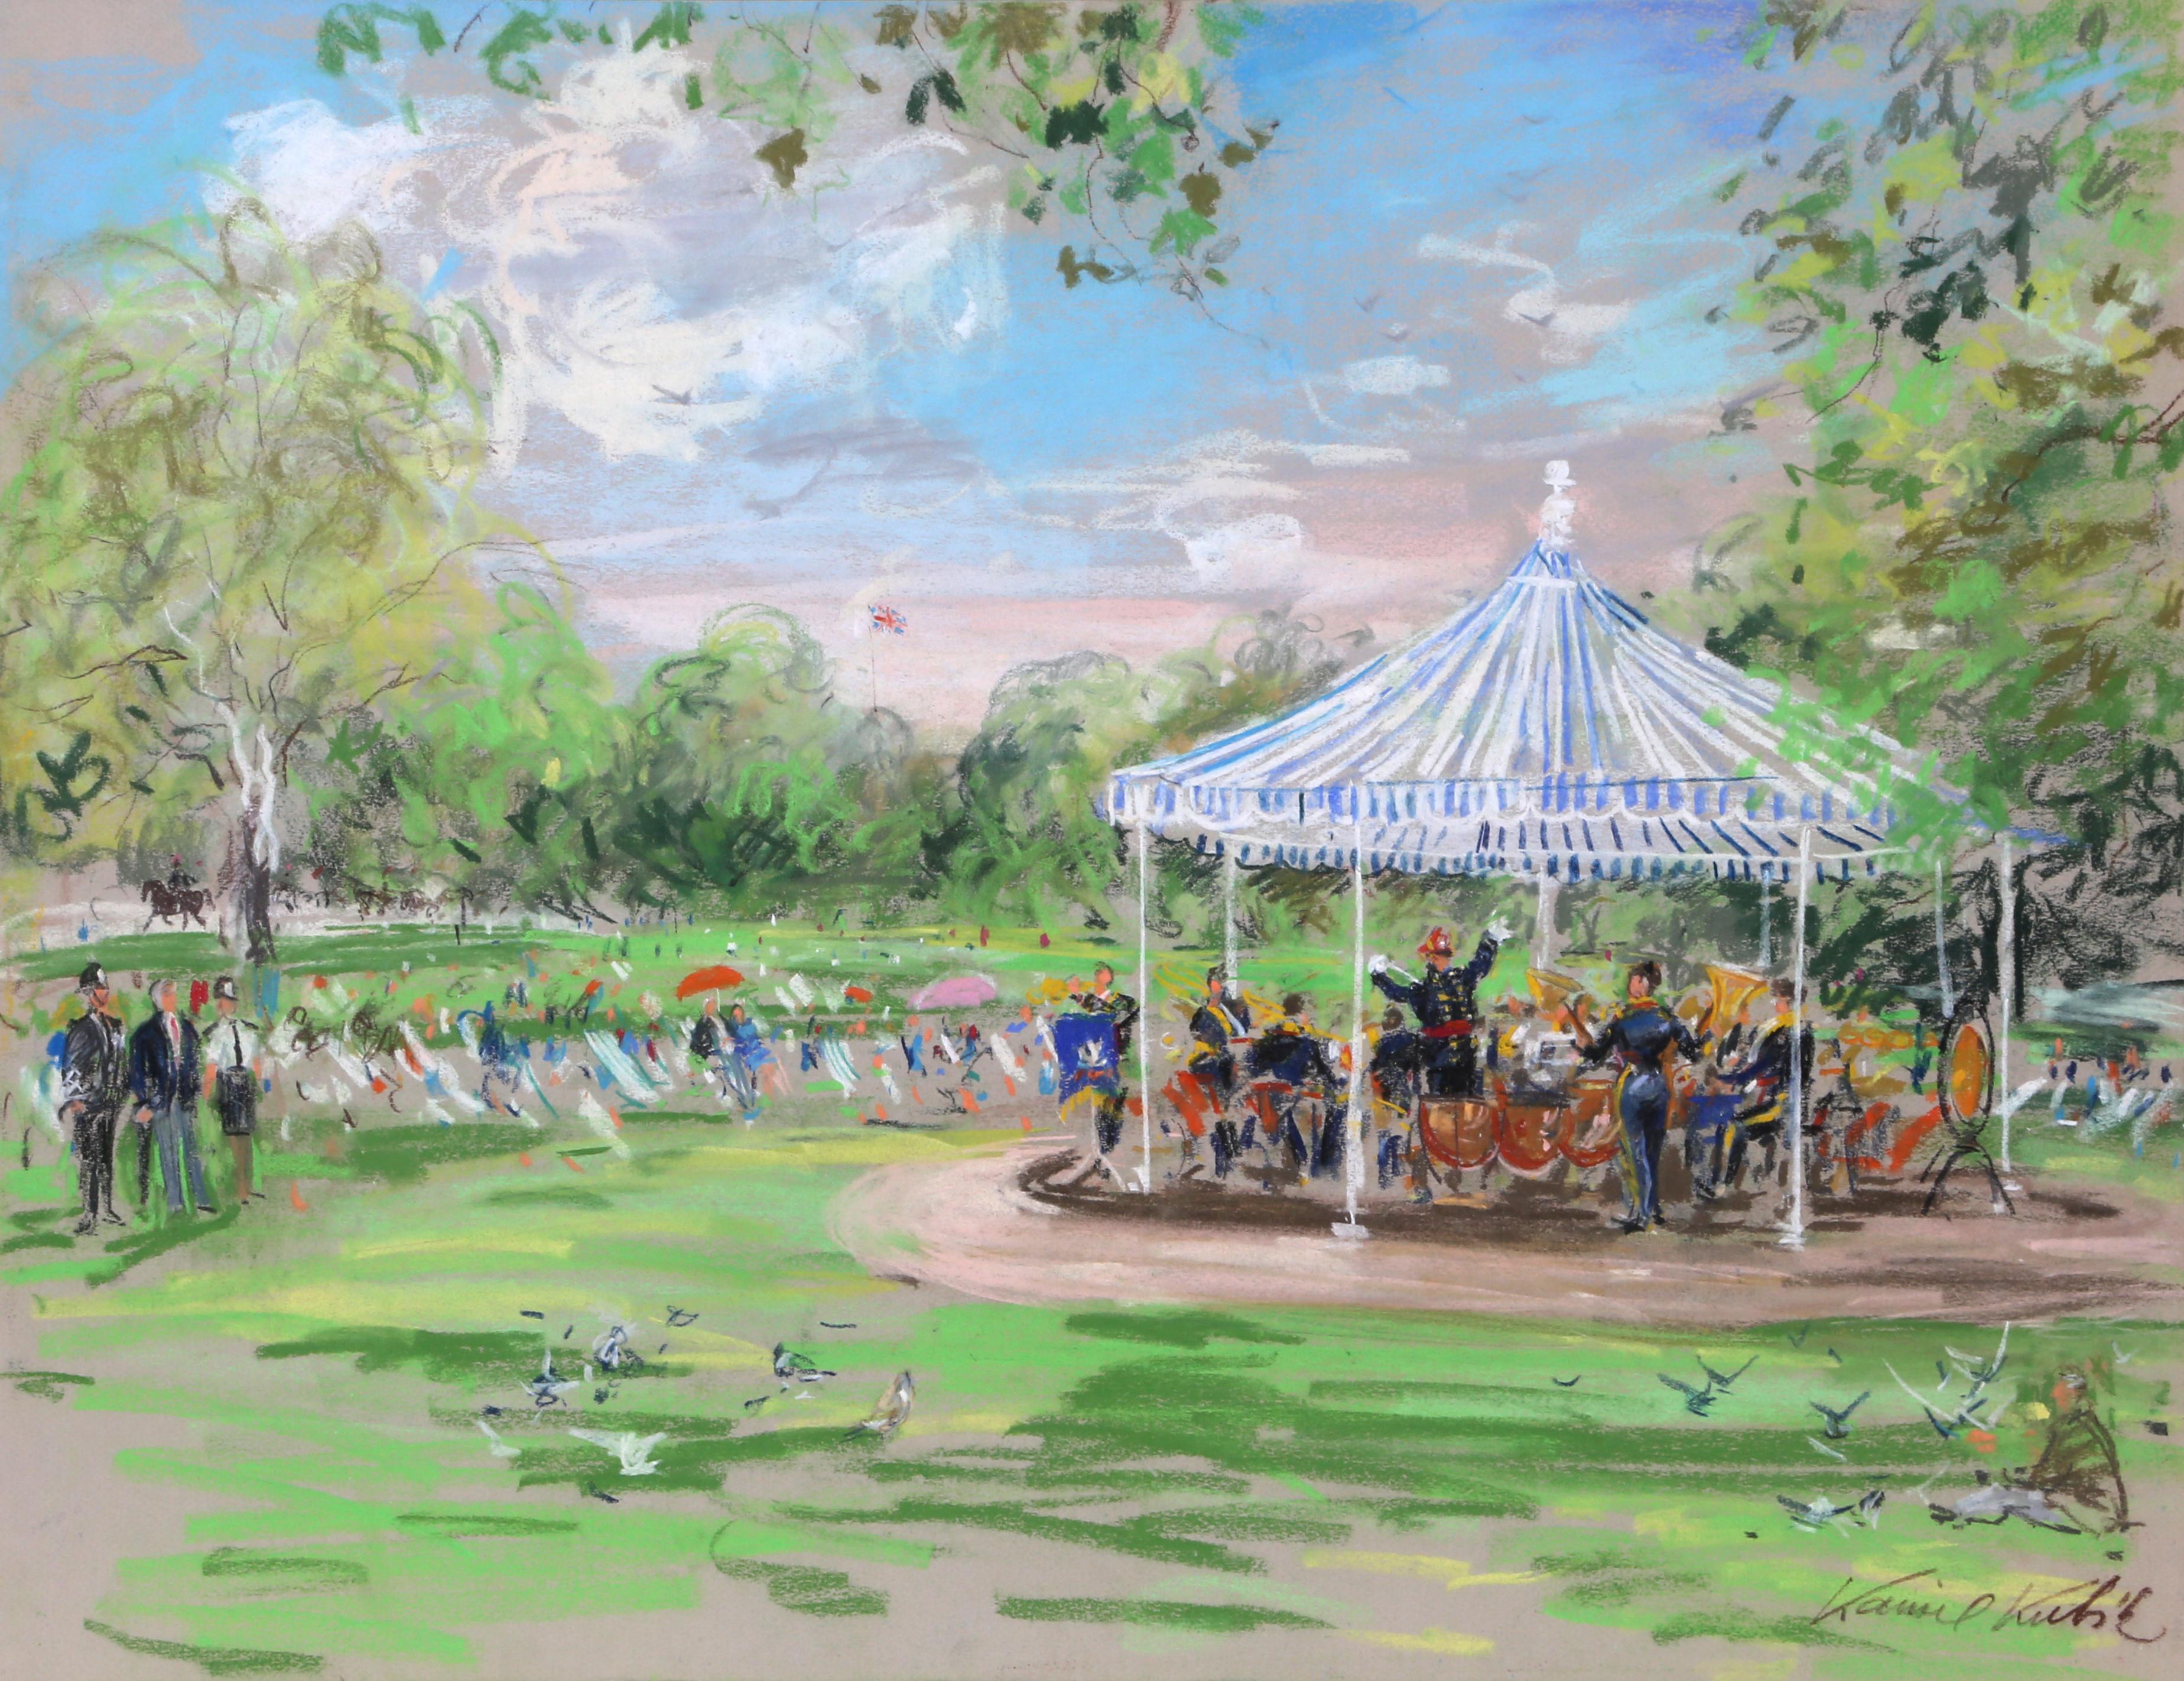 Band in the Park, London, Pastel Drawing by Kamil Kubik